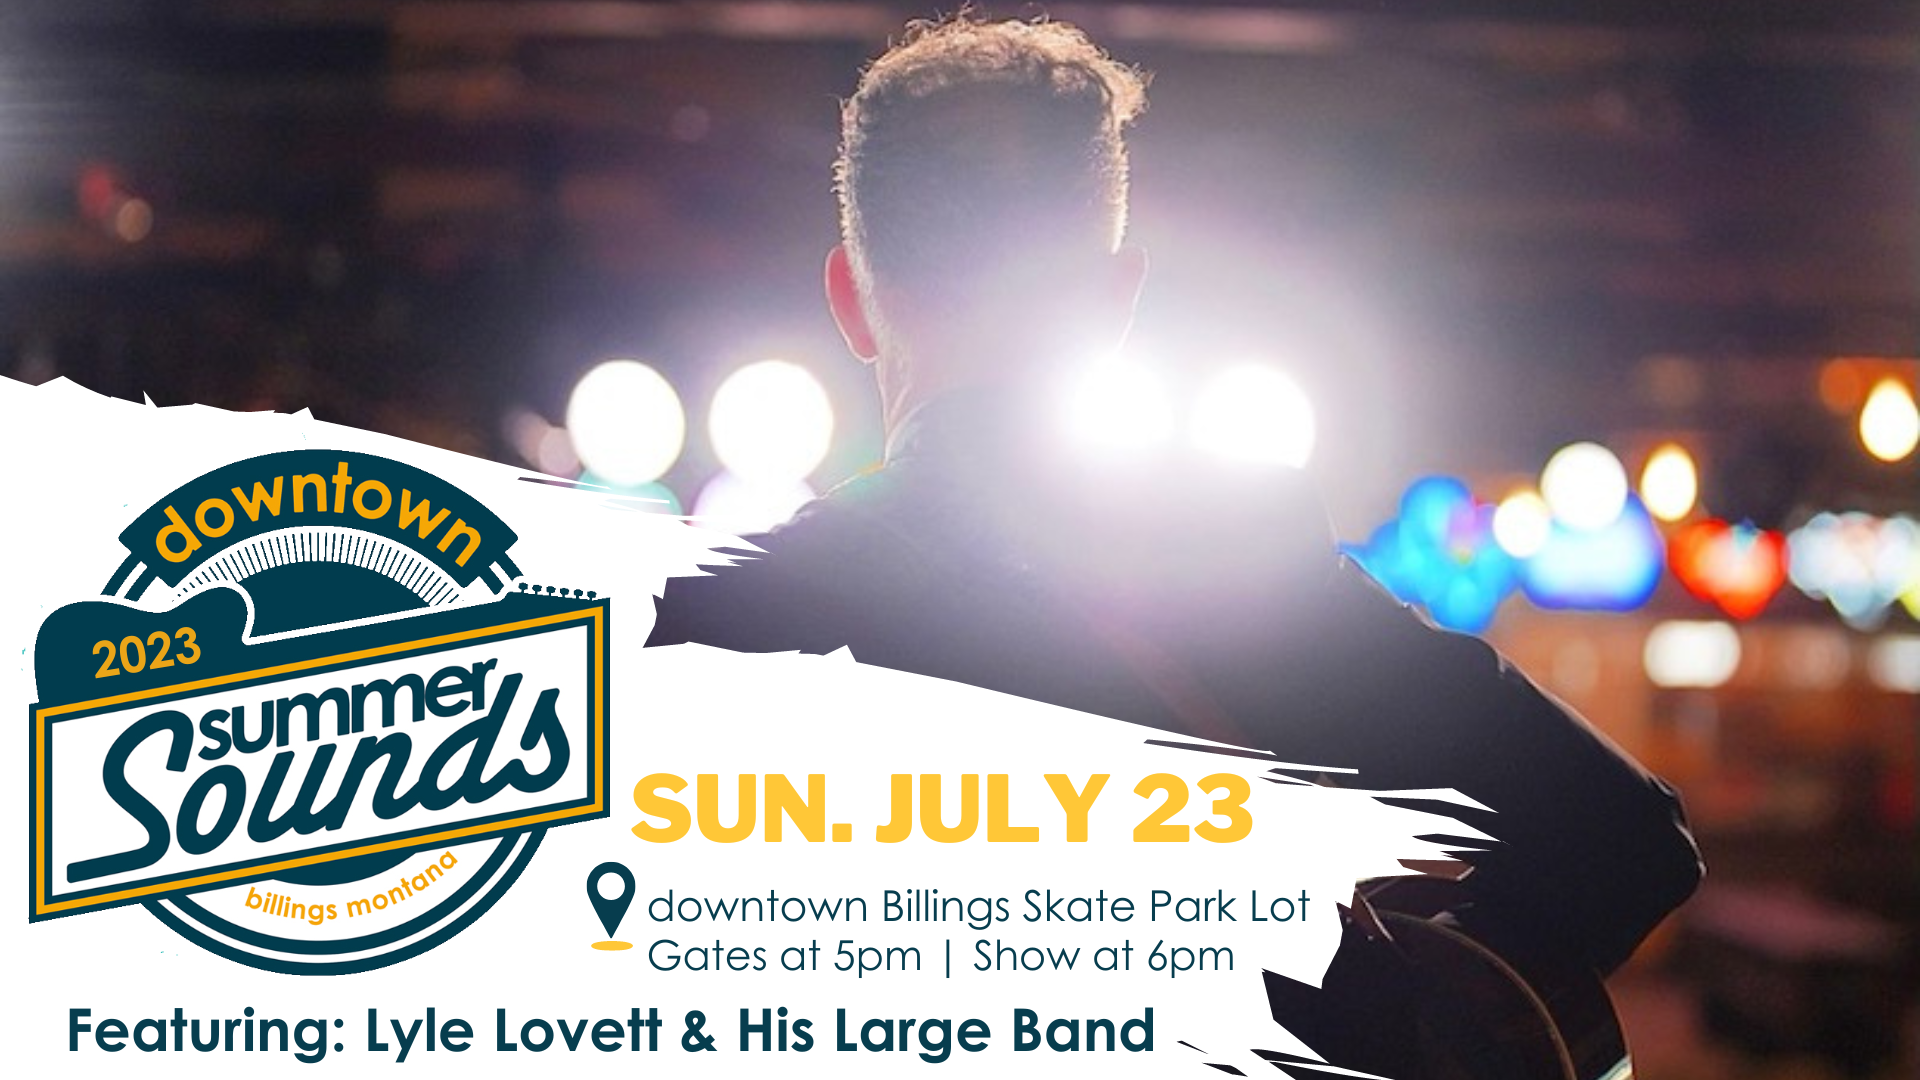 Downtown Summer Sounds in downtown Billings at the Skate Park lot on Sunday July 23rd. Featuring Lyle Lovett and his Large Band,